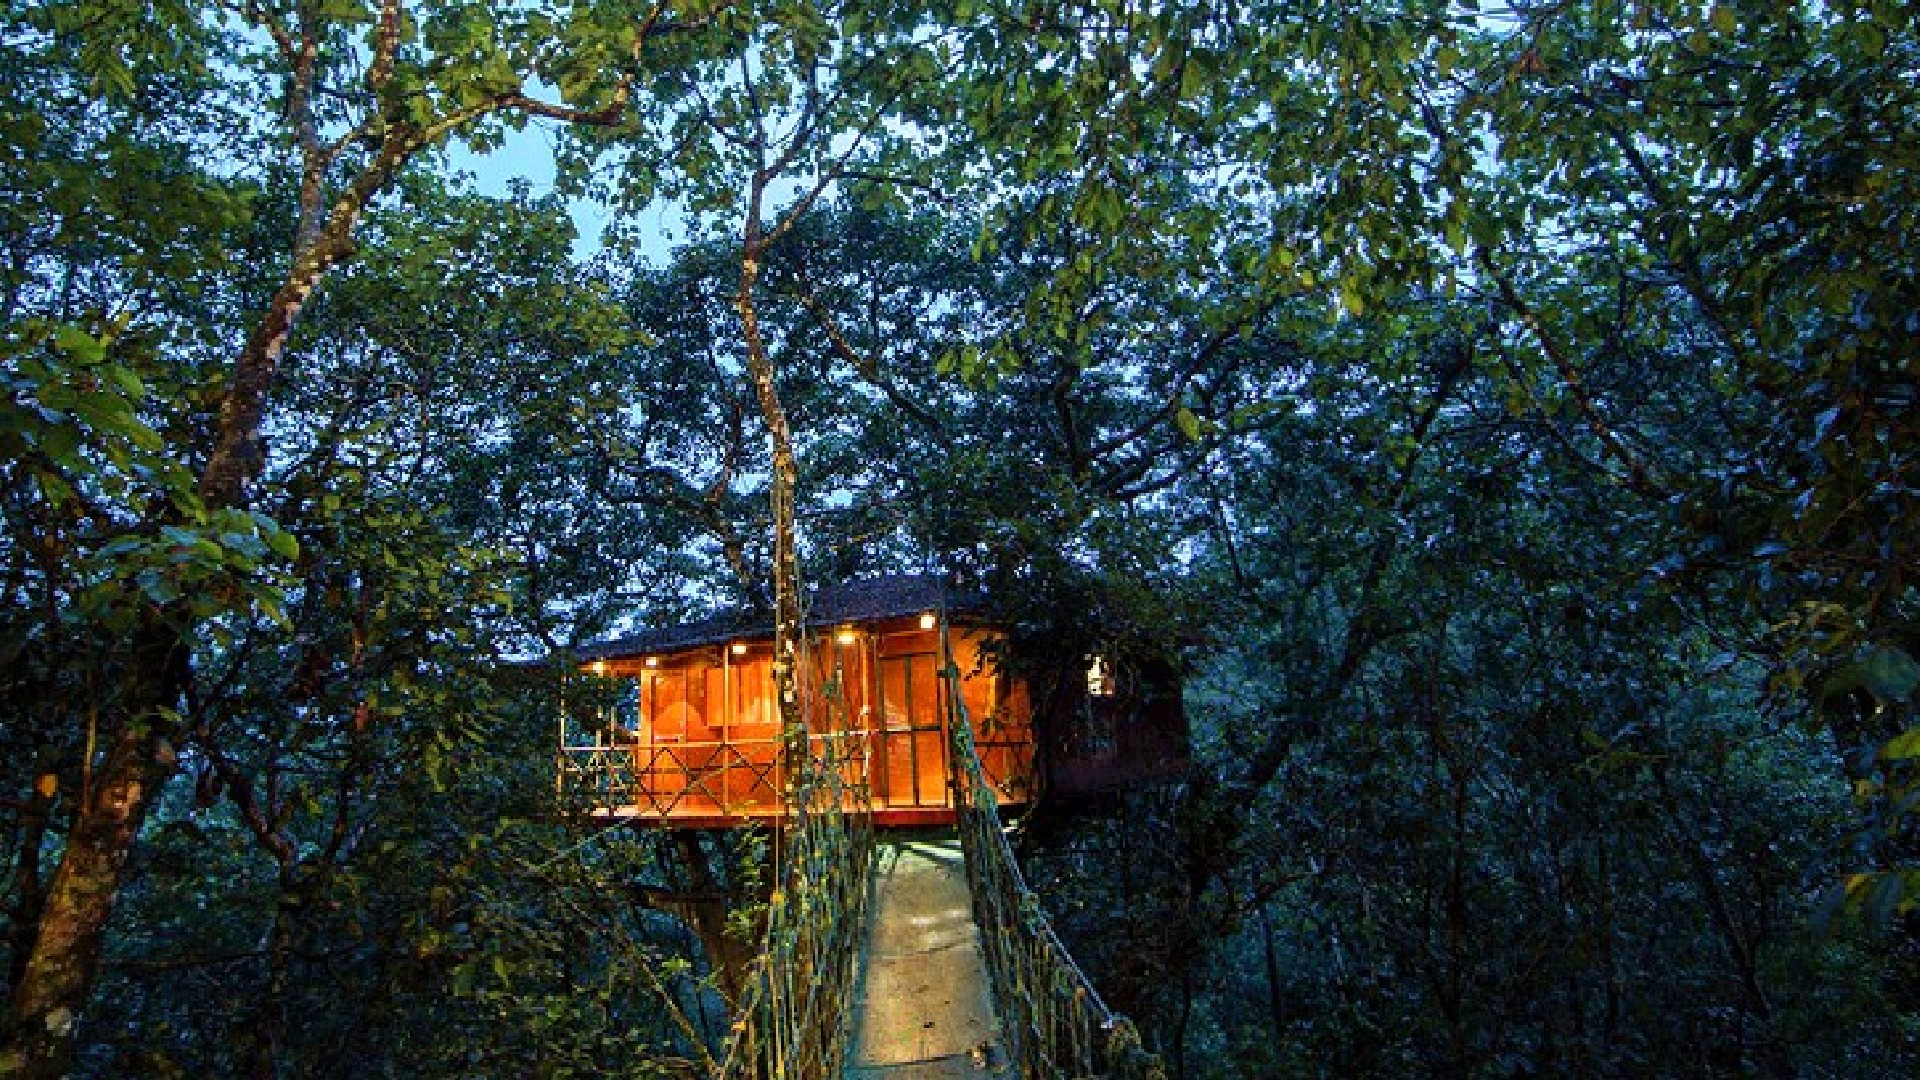 This Tree House In Kerala Is In The Middle Of A Jungle & Is Surrounded By Streams